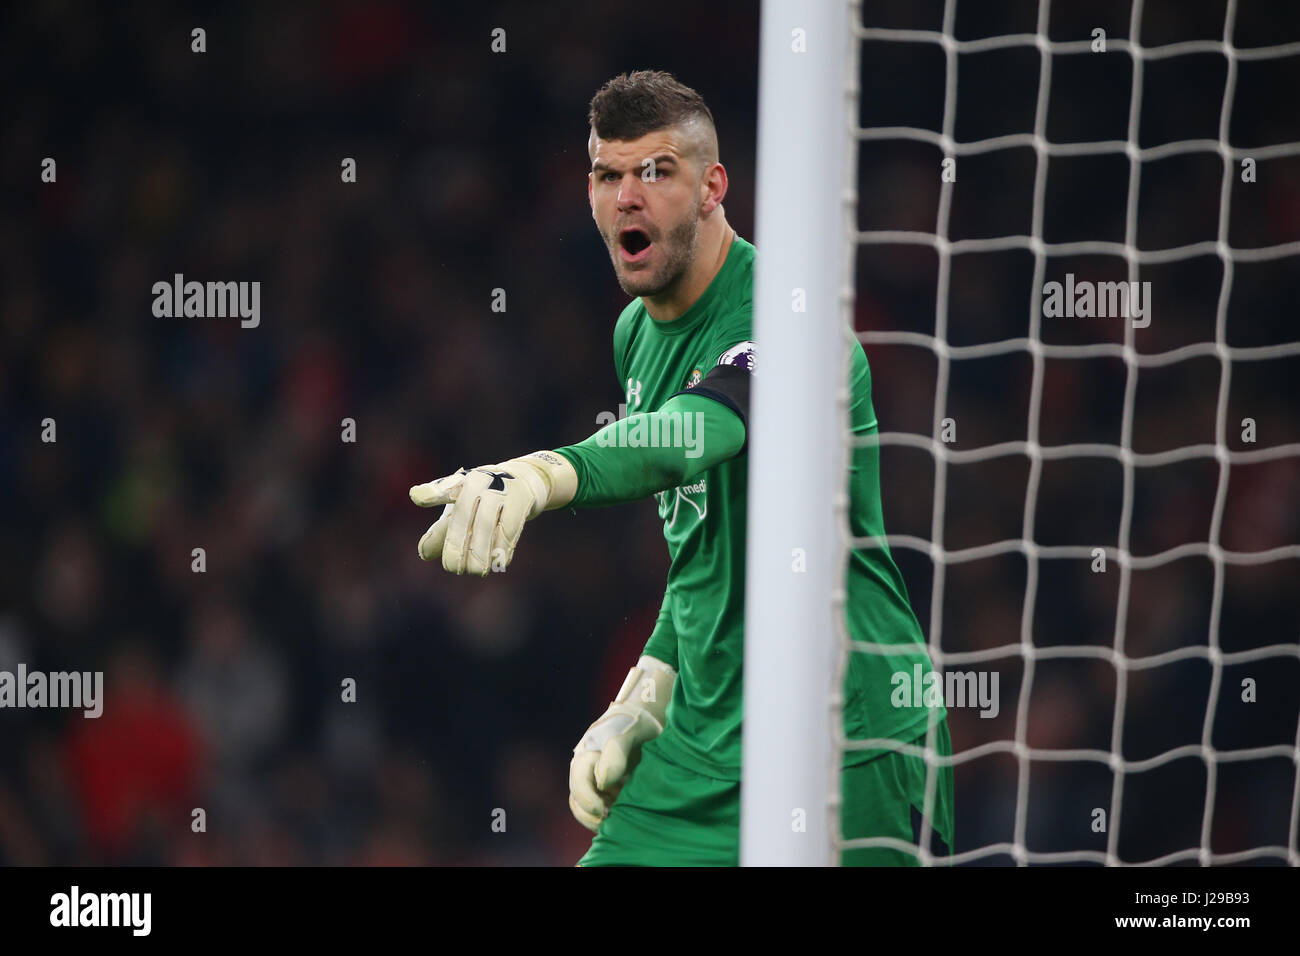 Fraser Forster of Southampton during the EFL Cup Quater-final match between Arsenal and Southampton at the Emirates Stadium in London. November 30, 2016. EDITORIAL USE ONLY - FA Premier League and Football League images are subject to DataCo Licence see www.football-dataco.com Stock Photo